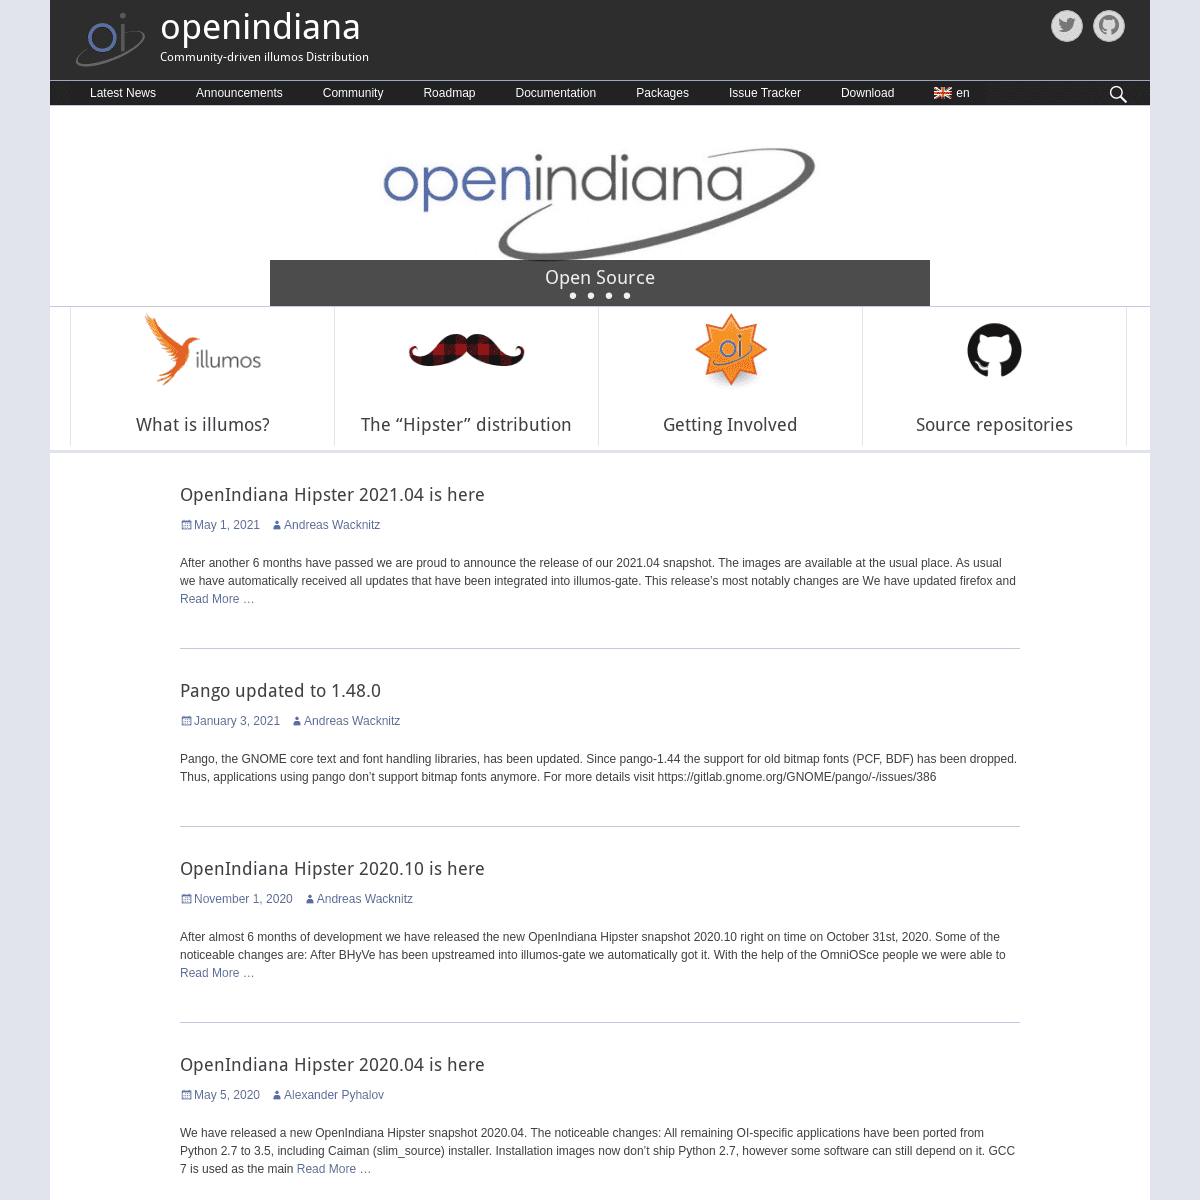 A complete backup of https://openindiana.org